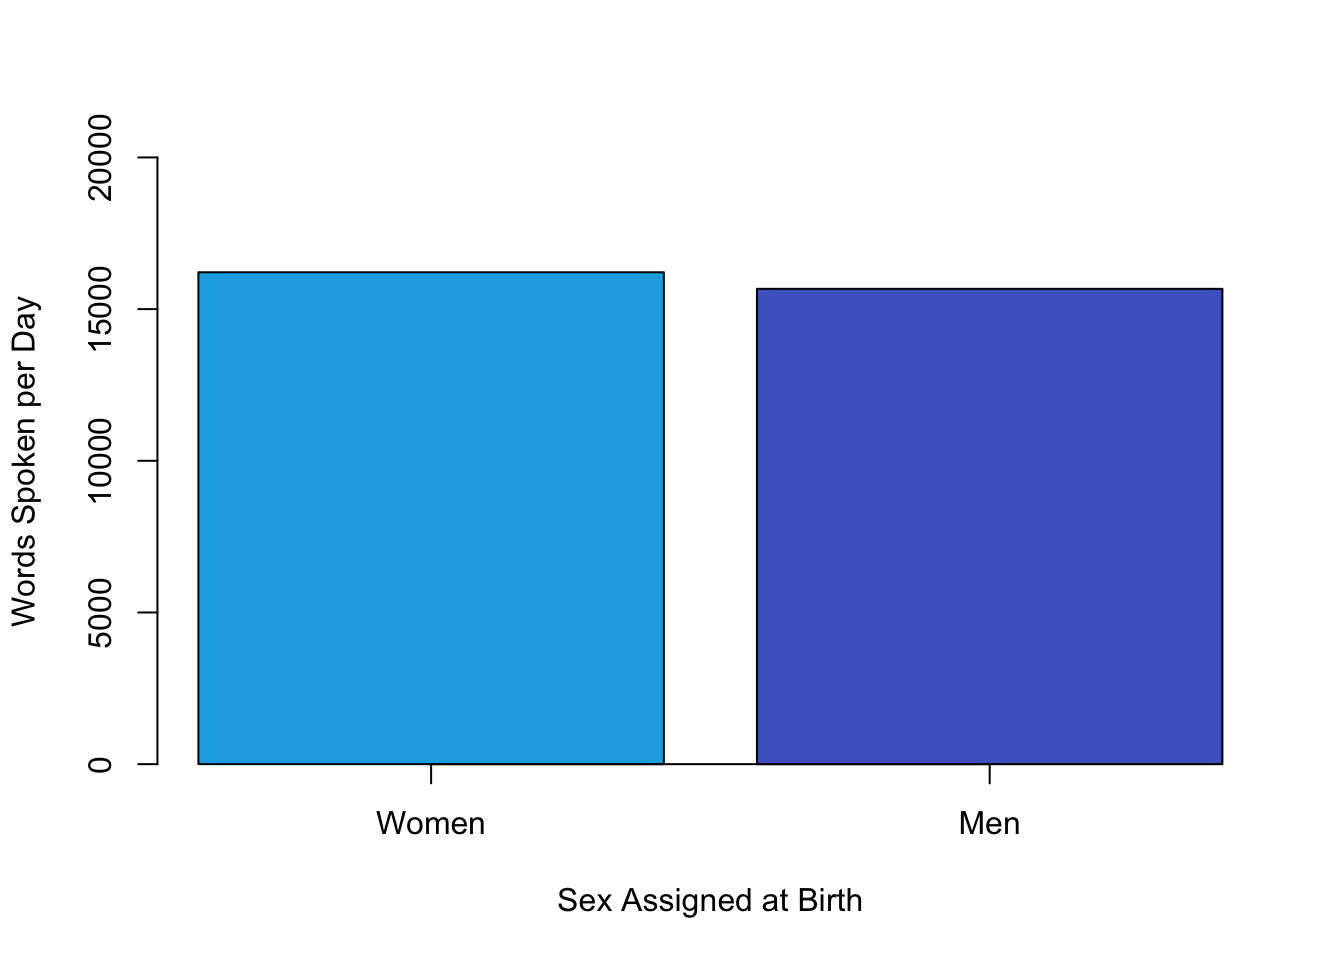 Bar graph showing the very small difference in the mean number of words spoken per day by women and men in a large sample. Based on data from @mehl2007women